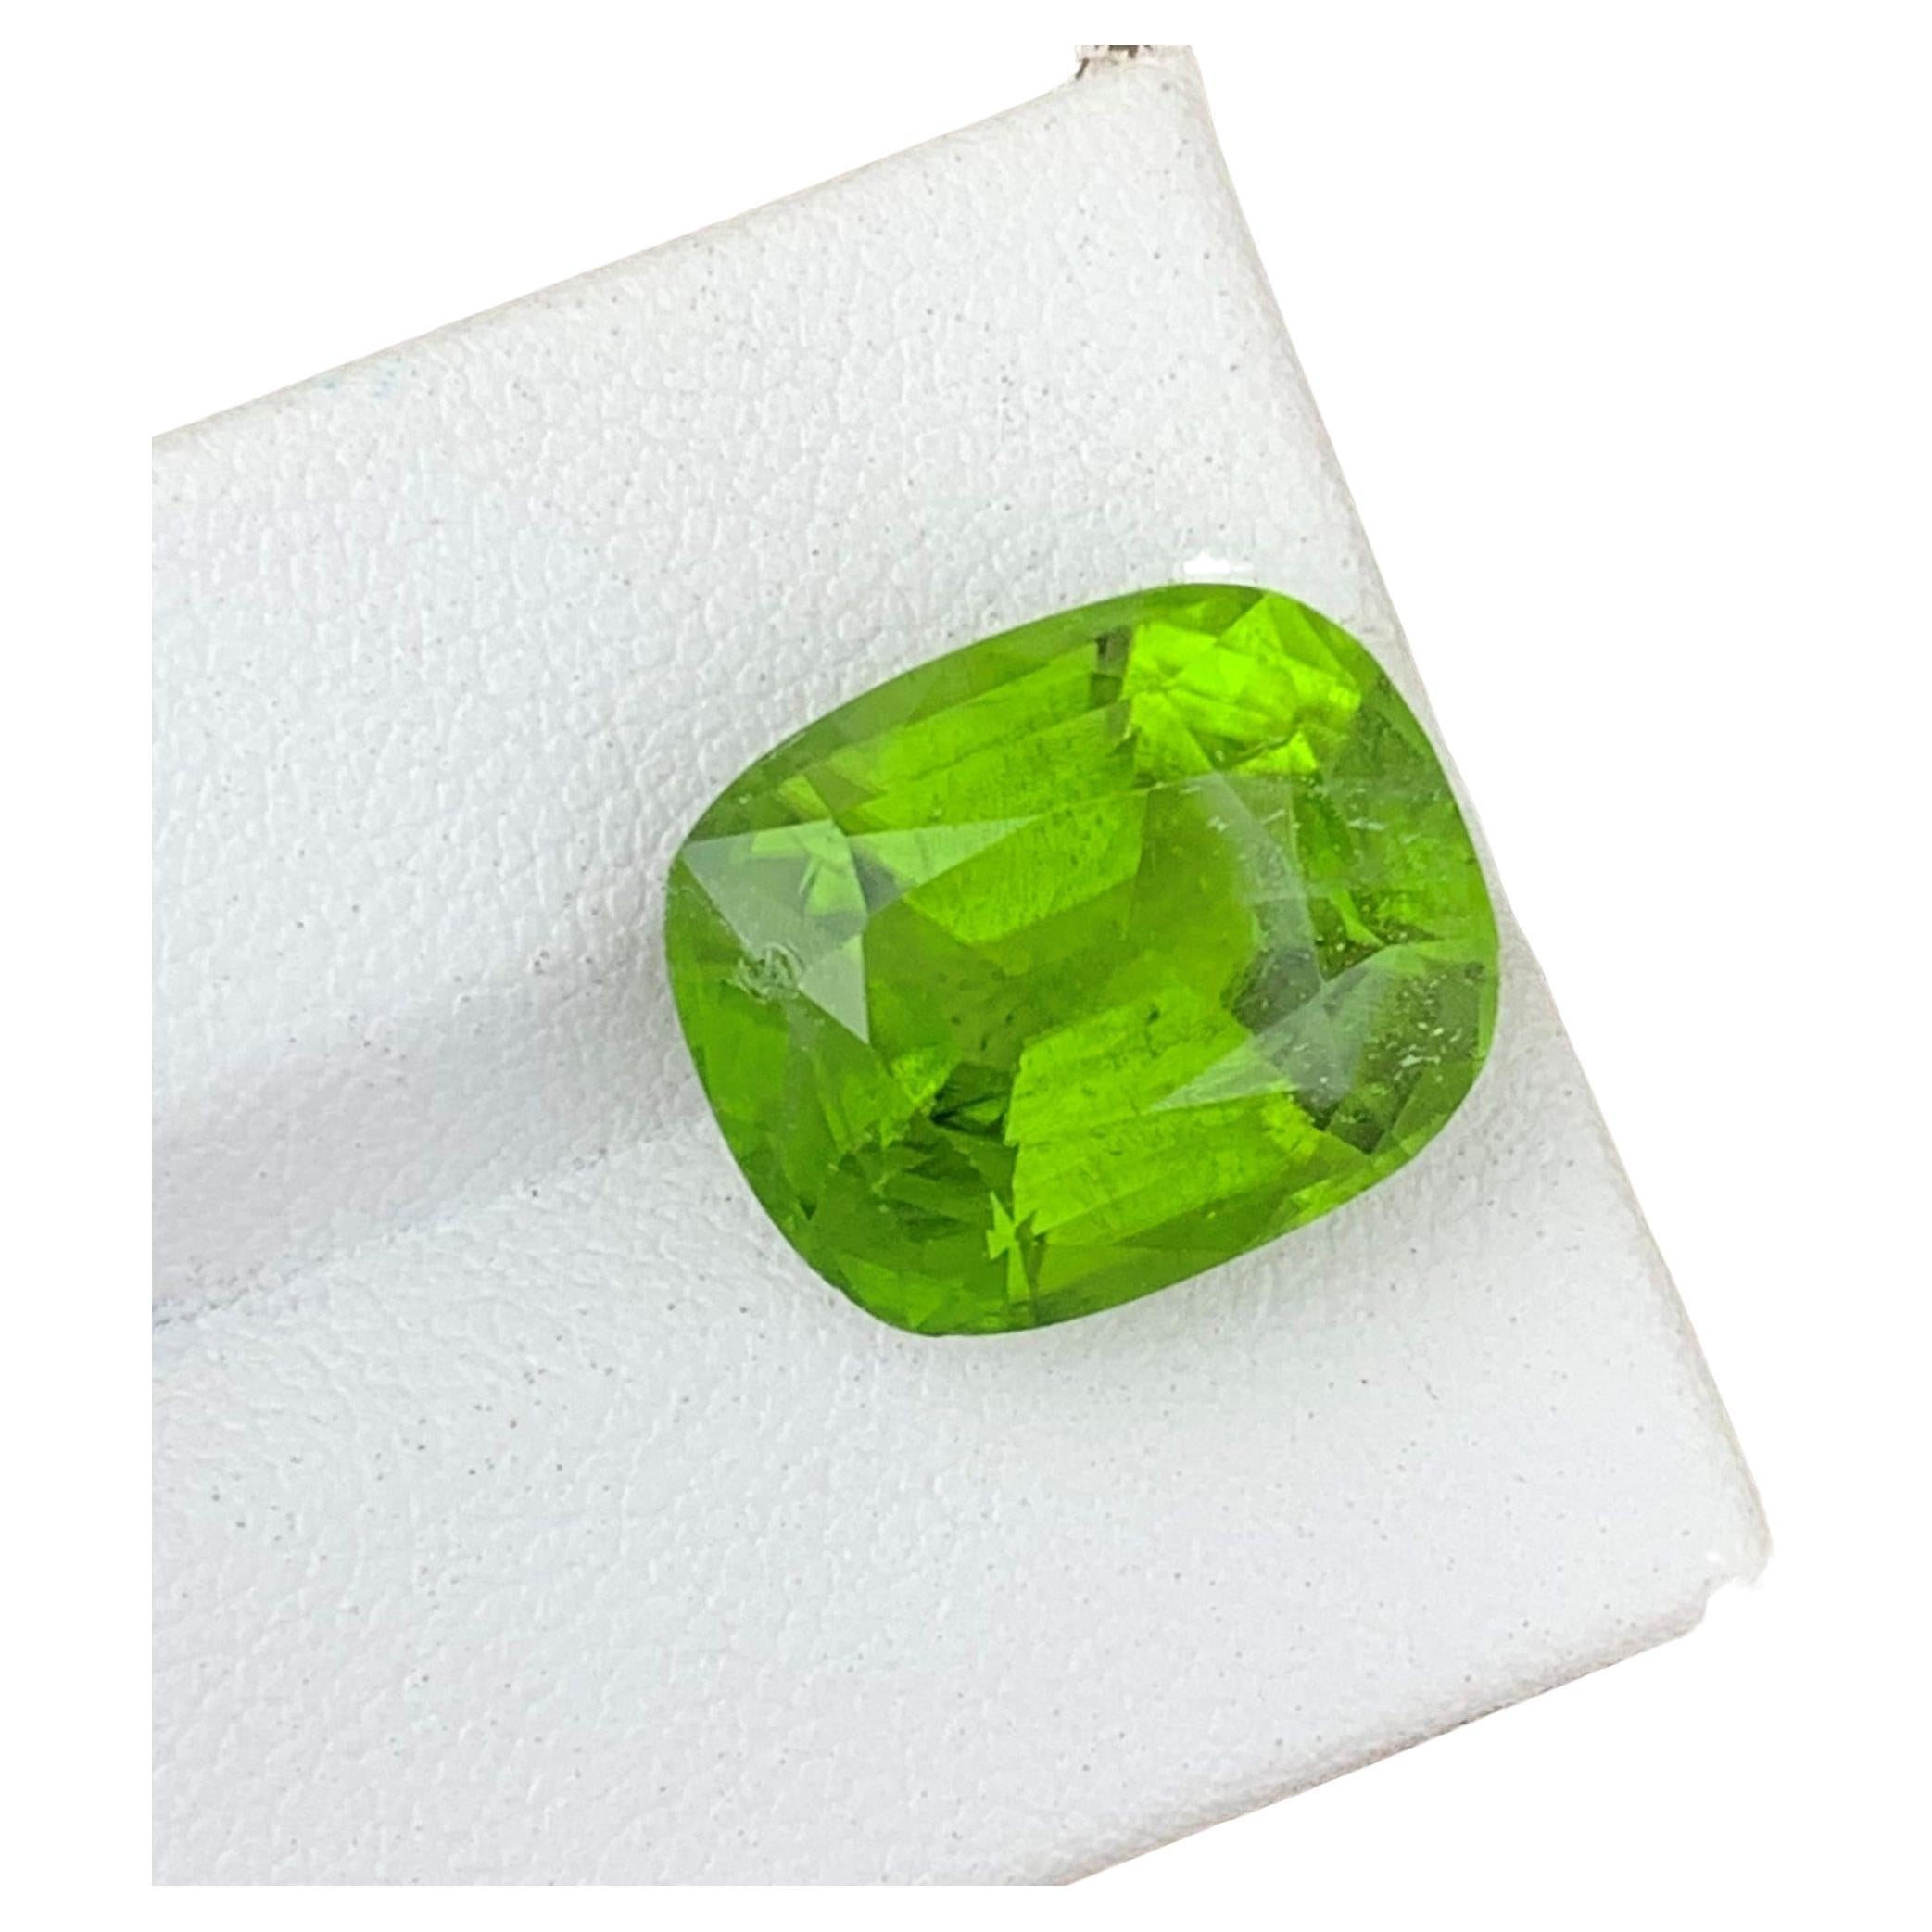 12.75 Carat Natural Cushion Cut Faceted Apple Green Peridot From Pakistan Mine For Sale